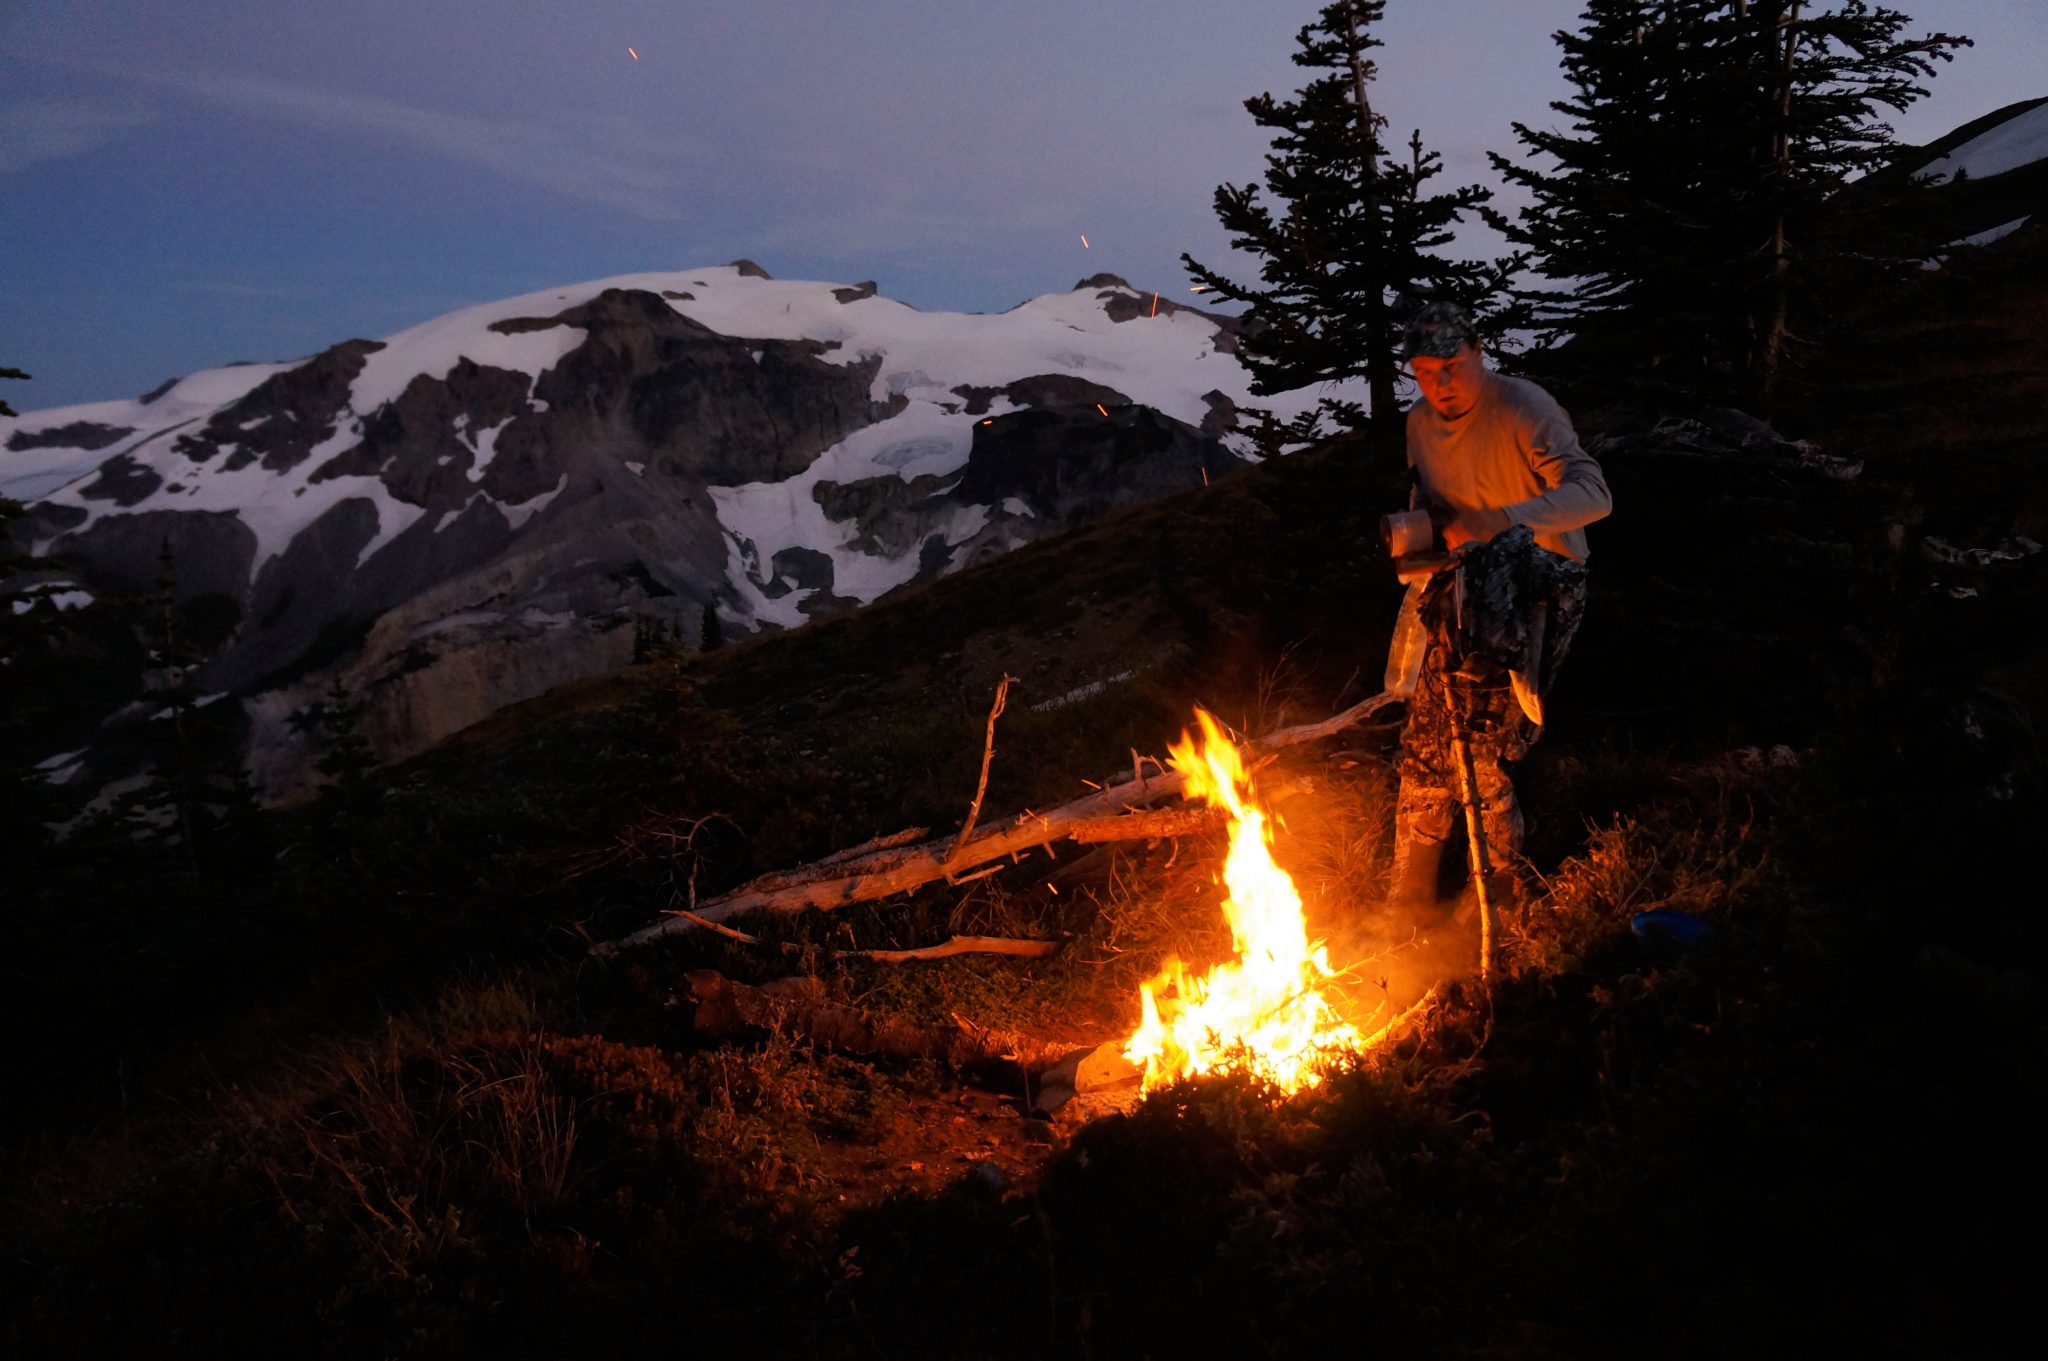 Campfire shots can capture the emotion of a hunt - you can almost smell the smoke